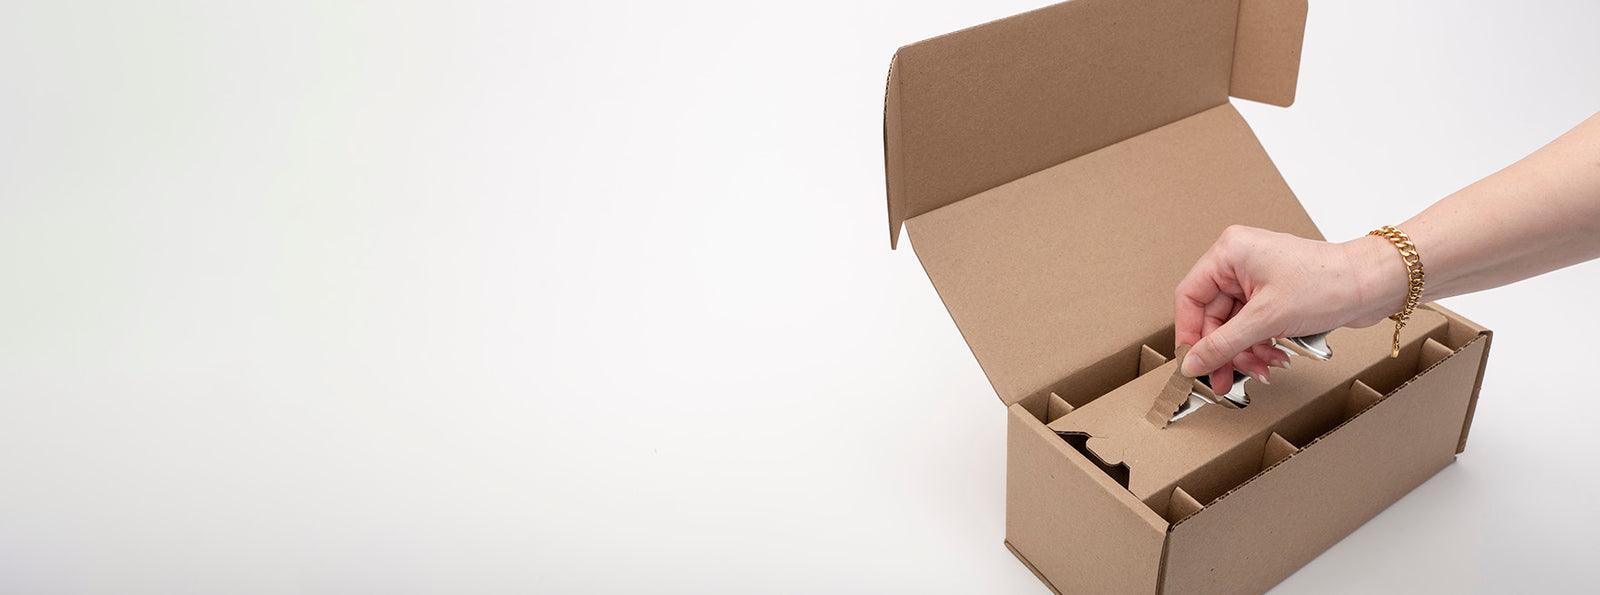 The Flush Packaging Commitment to providing quality shipping boxes and packaging for small businesses